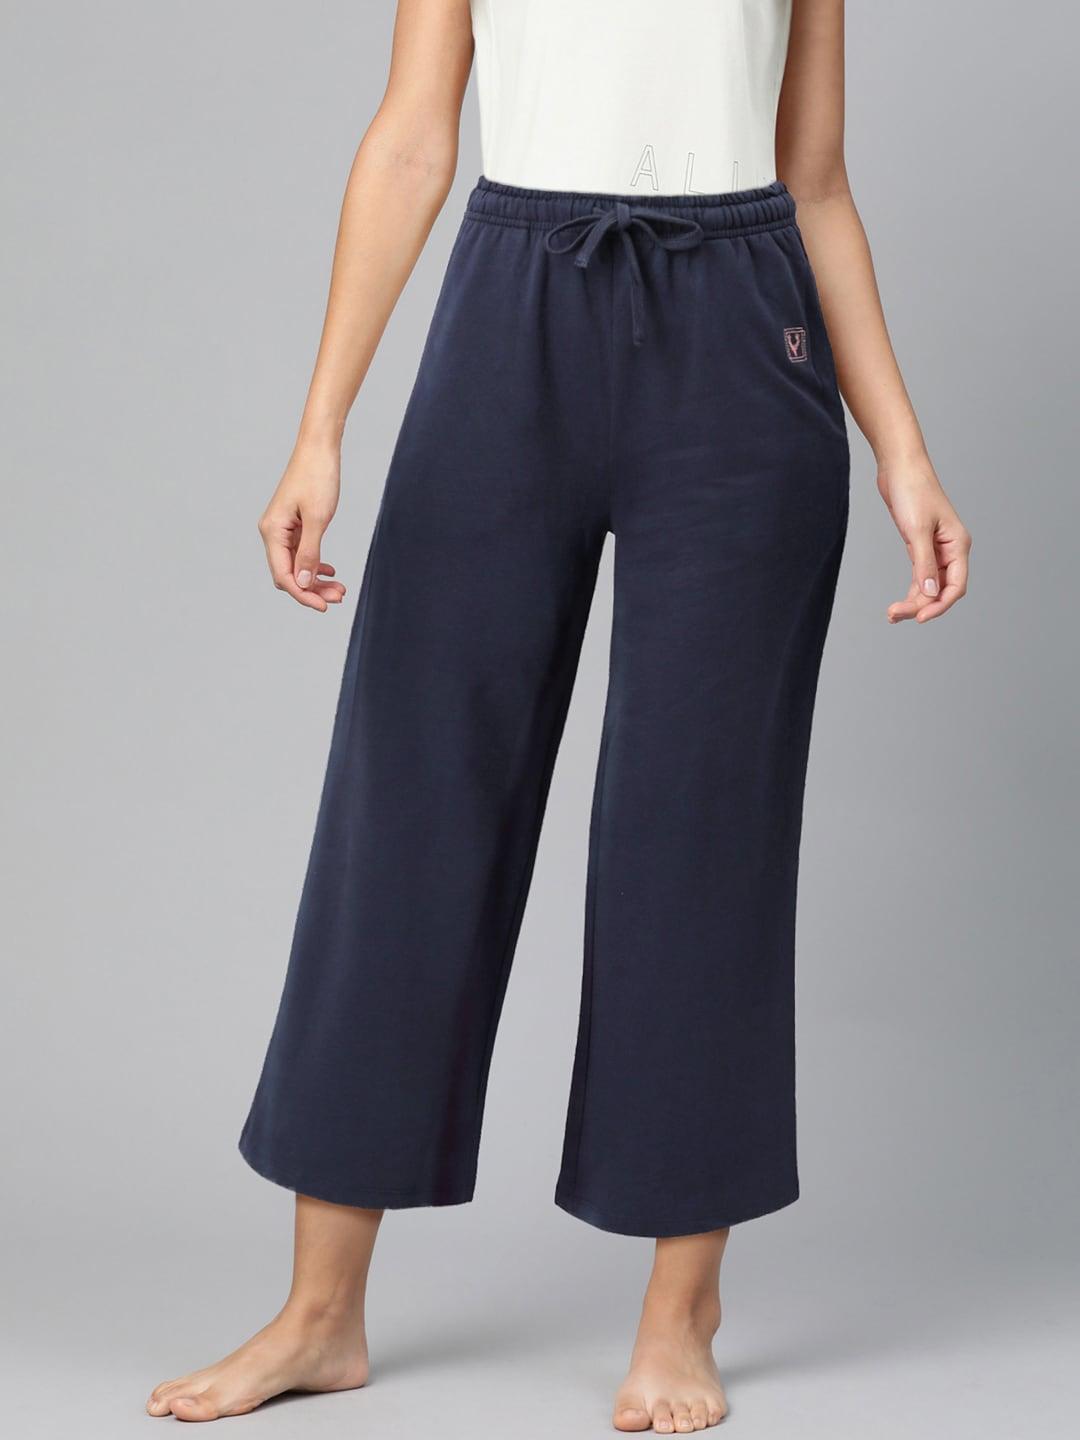 allen solly woman navy blue solid pure cotton lounge pants